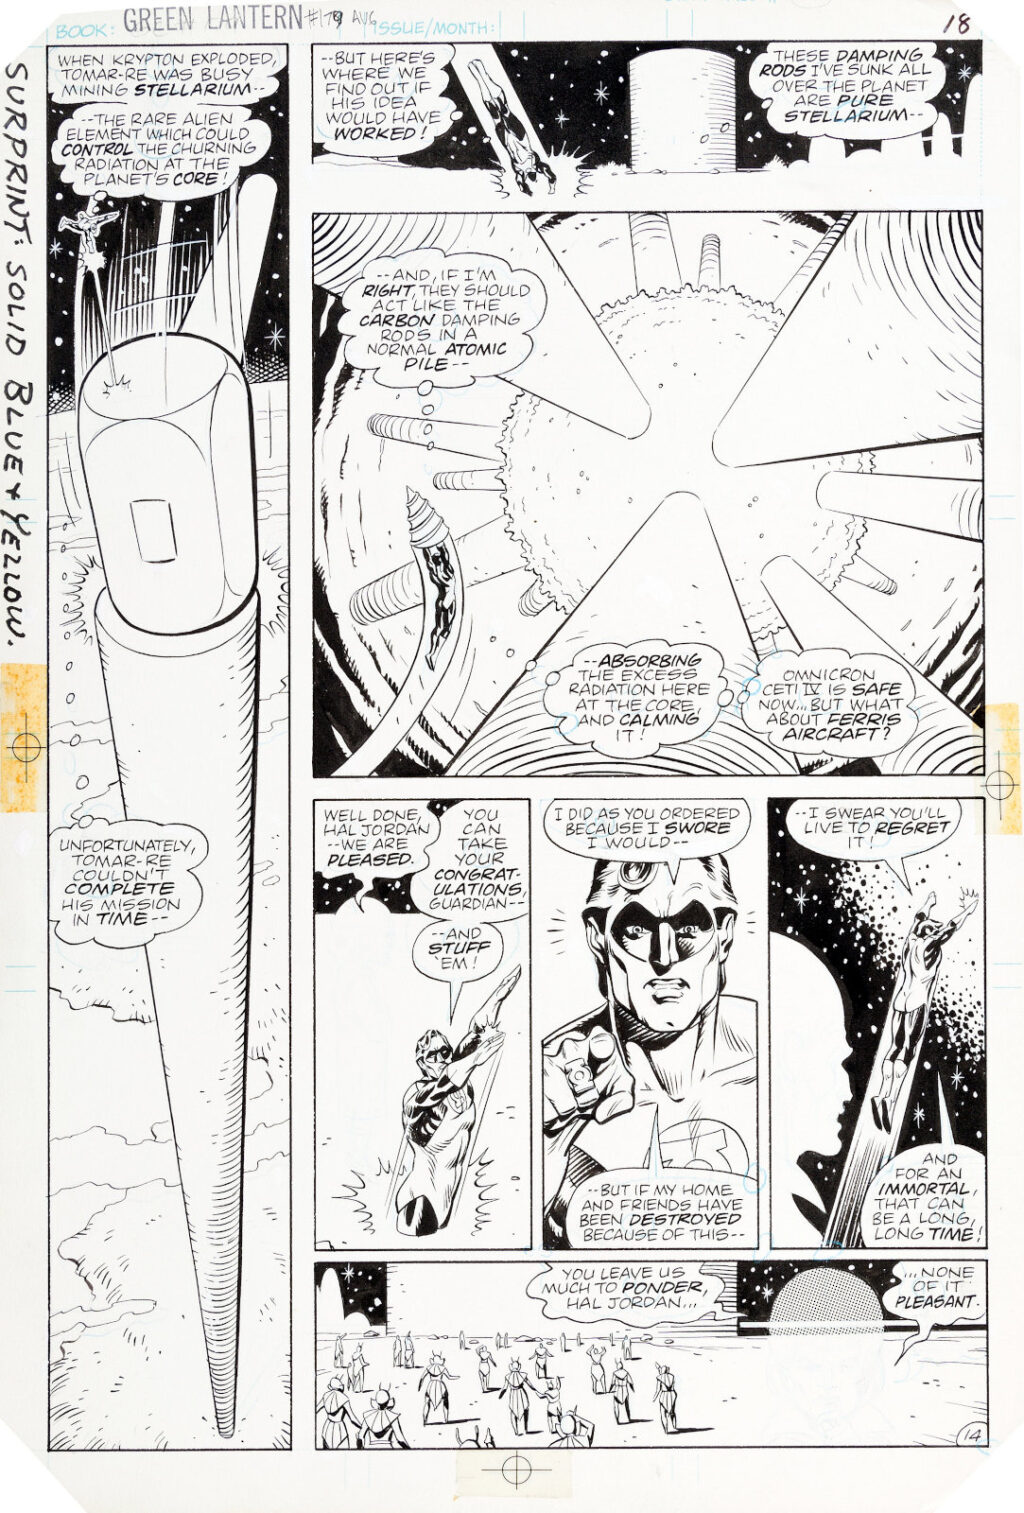 Green Lantern issue 179 page 14 by Dave Gibbons